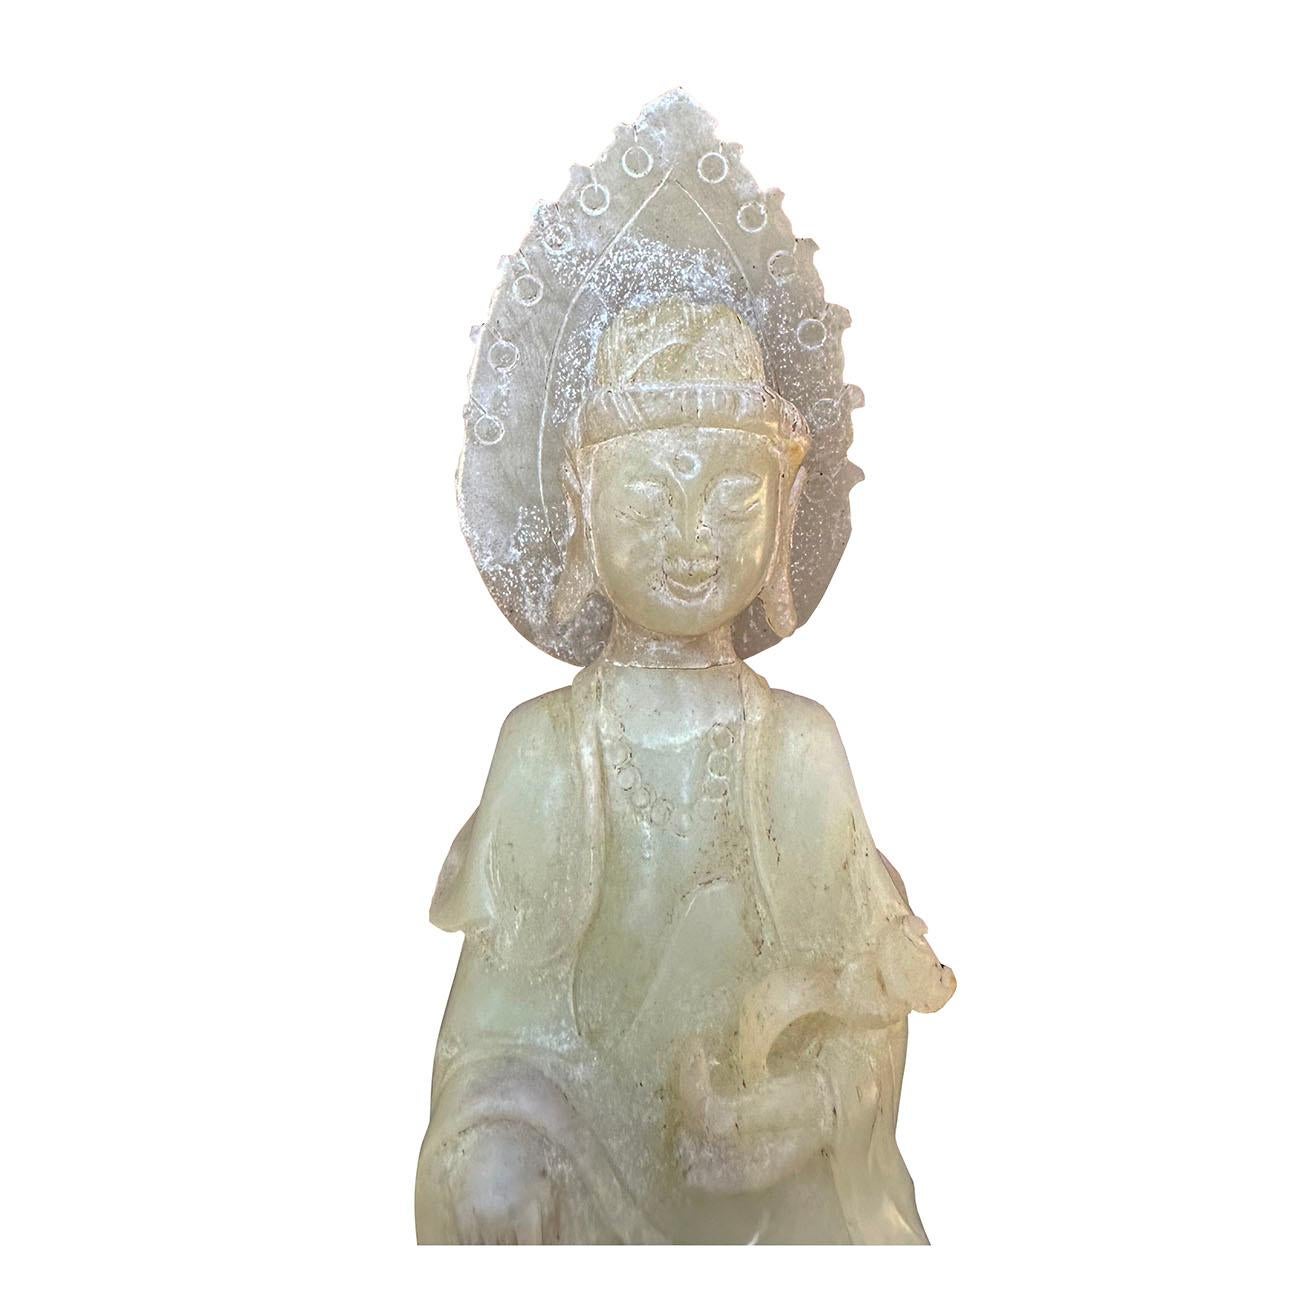 This magnificent Chinese hand carved Jade Kwan Yin Bodhisattva statuary shows very detailed hand carving works on it. It is all hand made and hand carved Kwan Yin sitting on the lotus seat and holding the Ru Yi in her hand with the gesture of Pudu